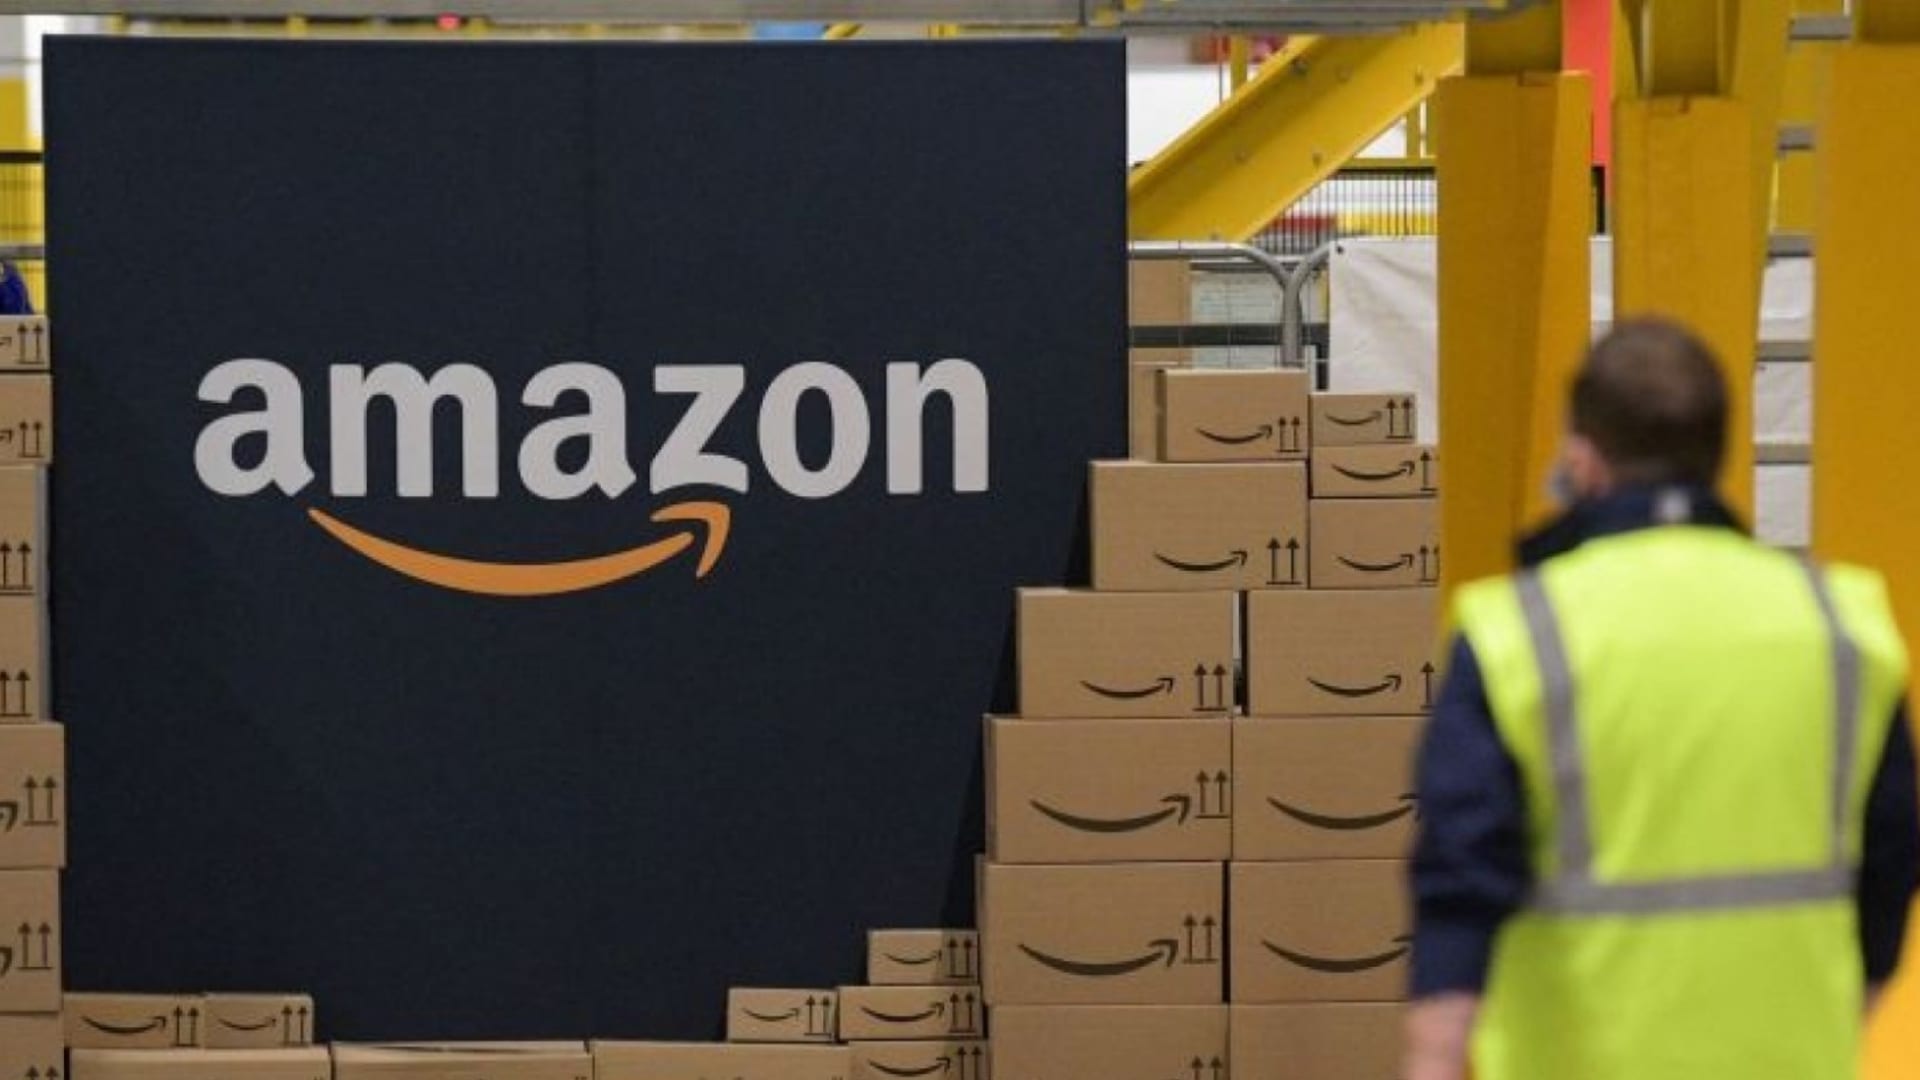 Amazon Shareholders Almost Voted Down Executive Pay. Here's the Brutal Truth Every Leader Should Learn